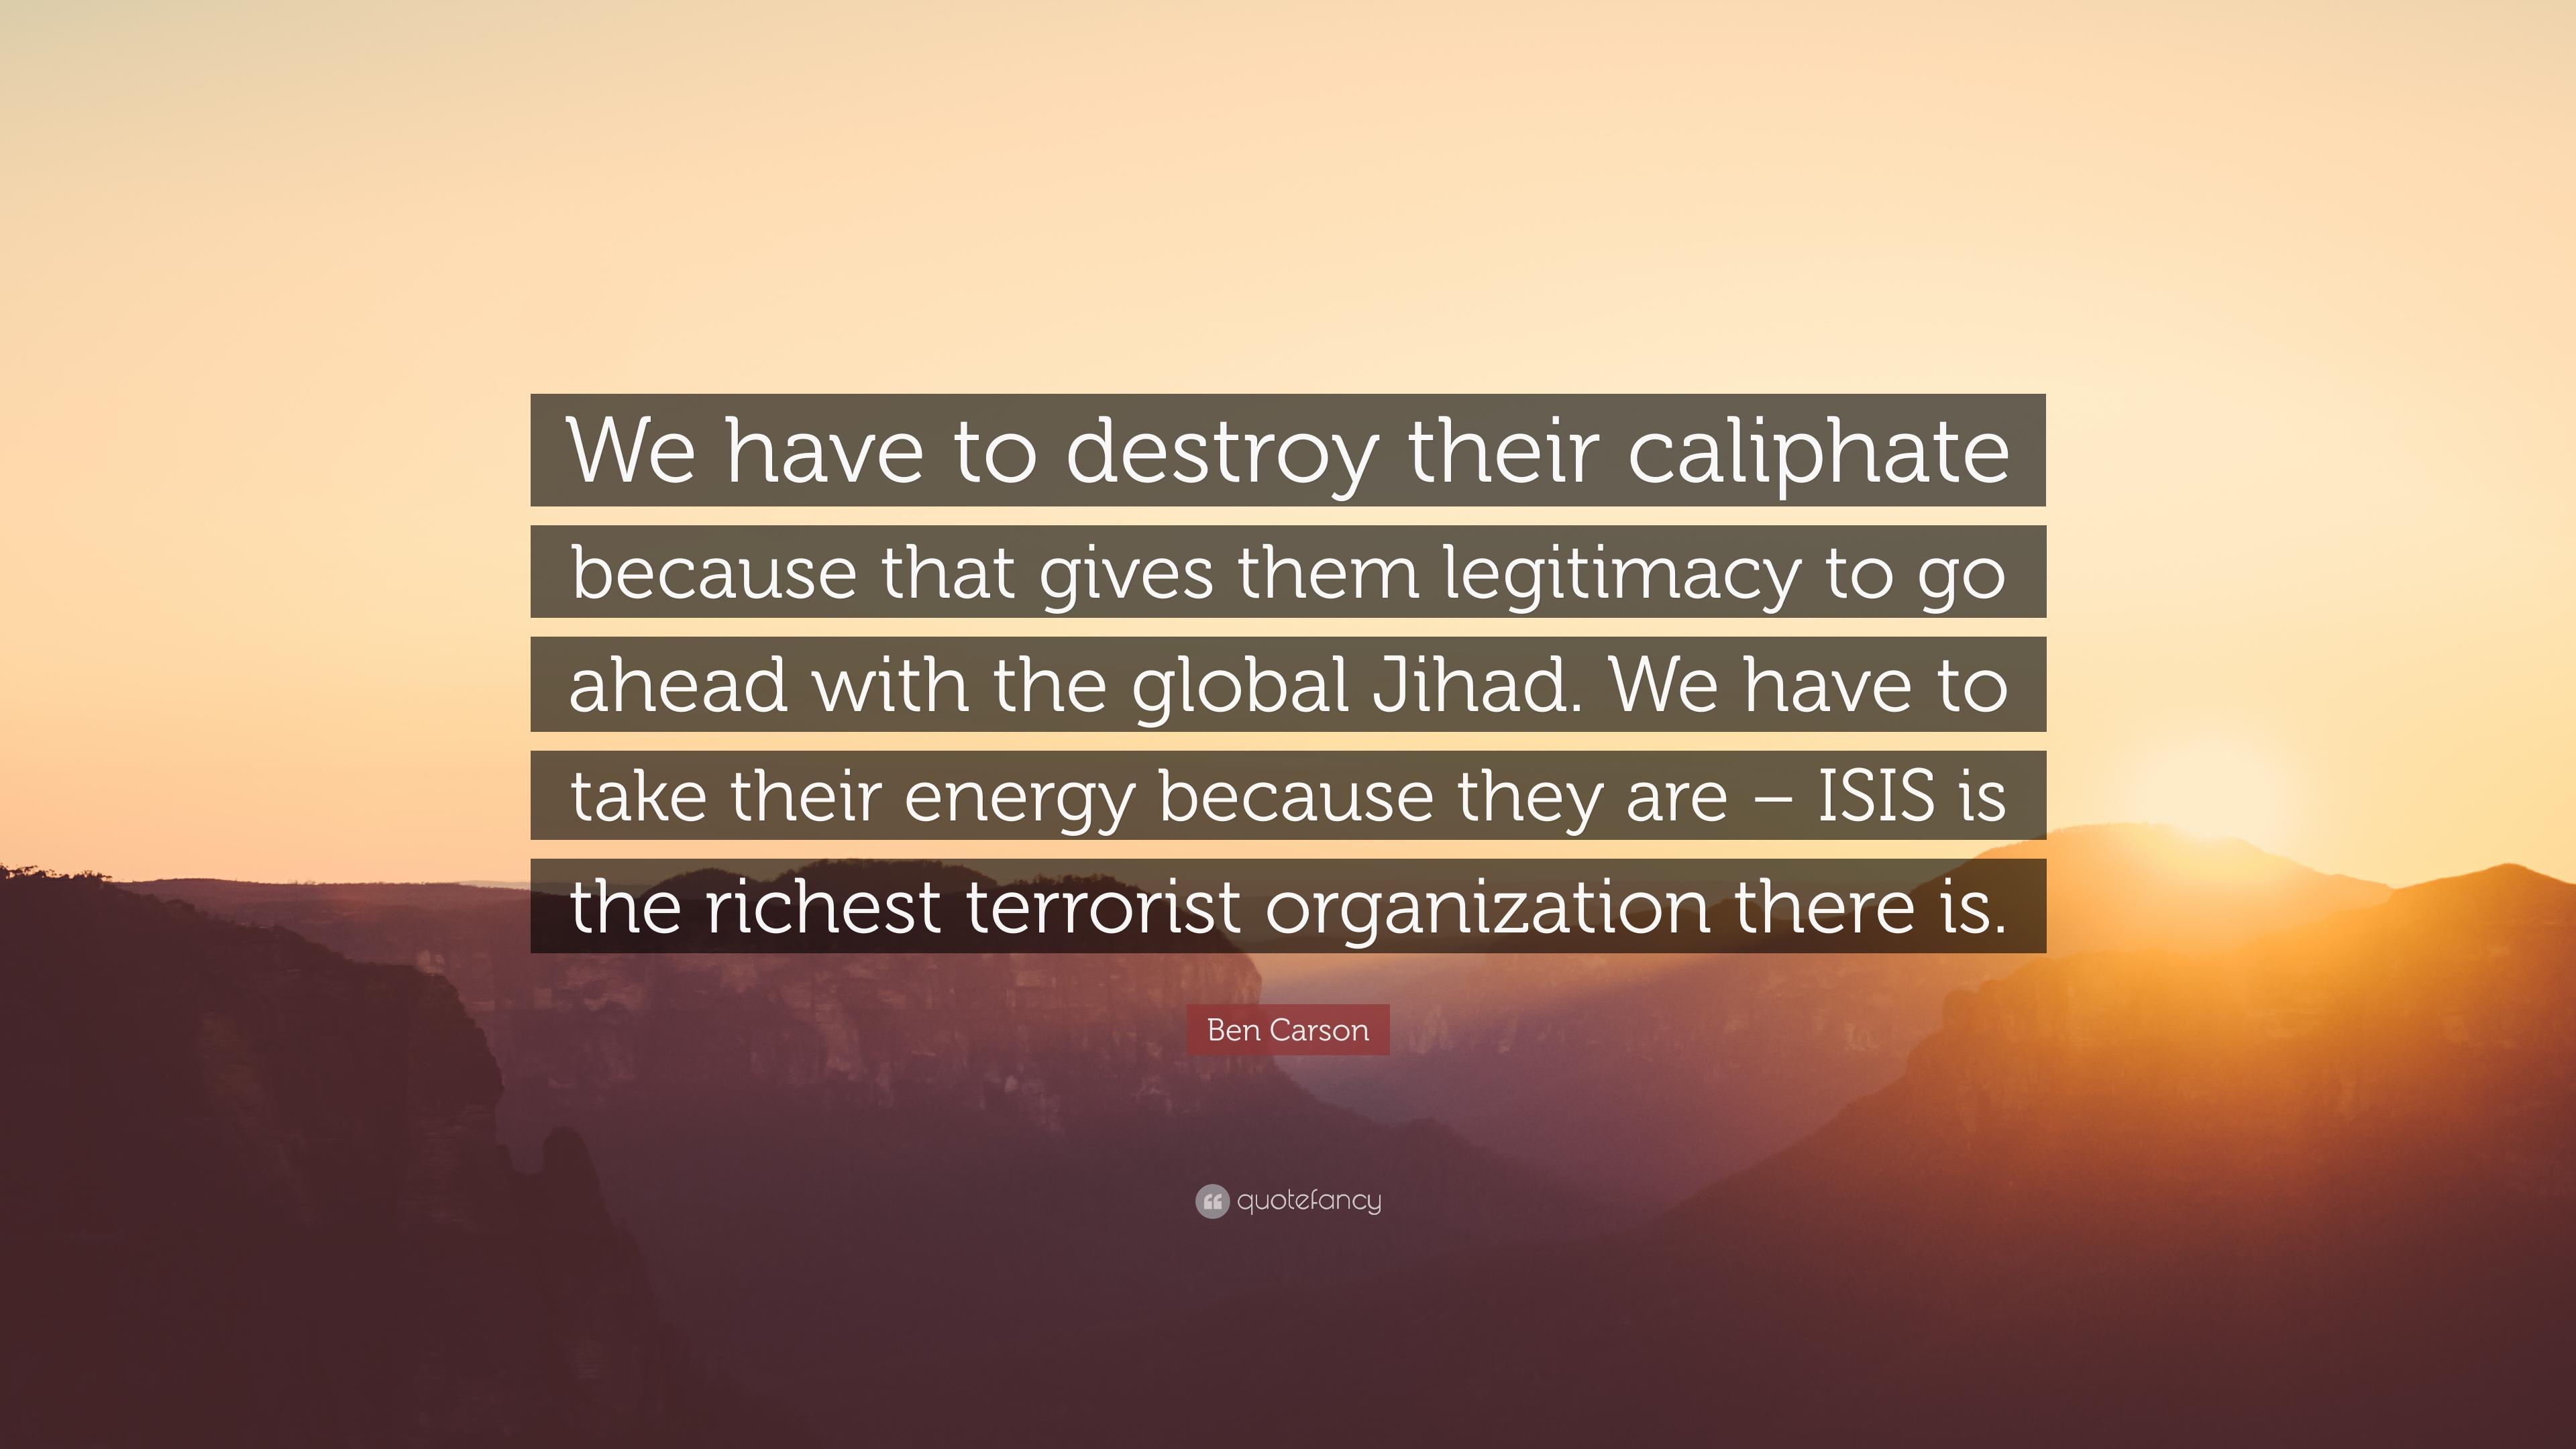 Ben Carson Quote: “We have to destroy their caliphate because that